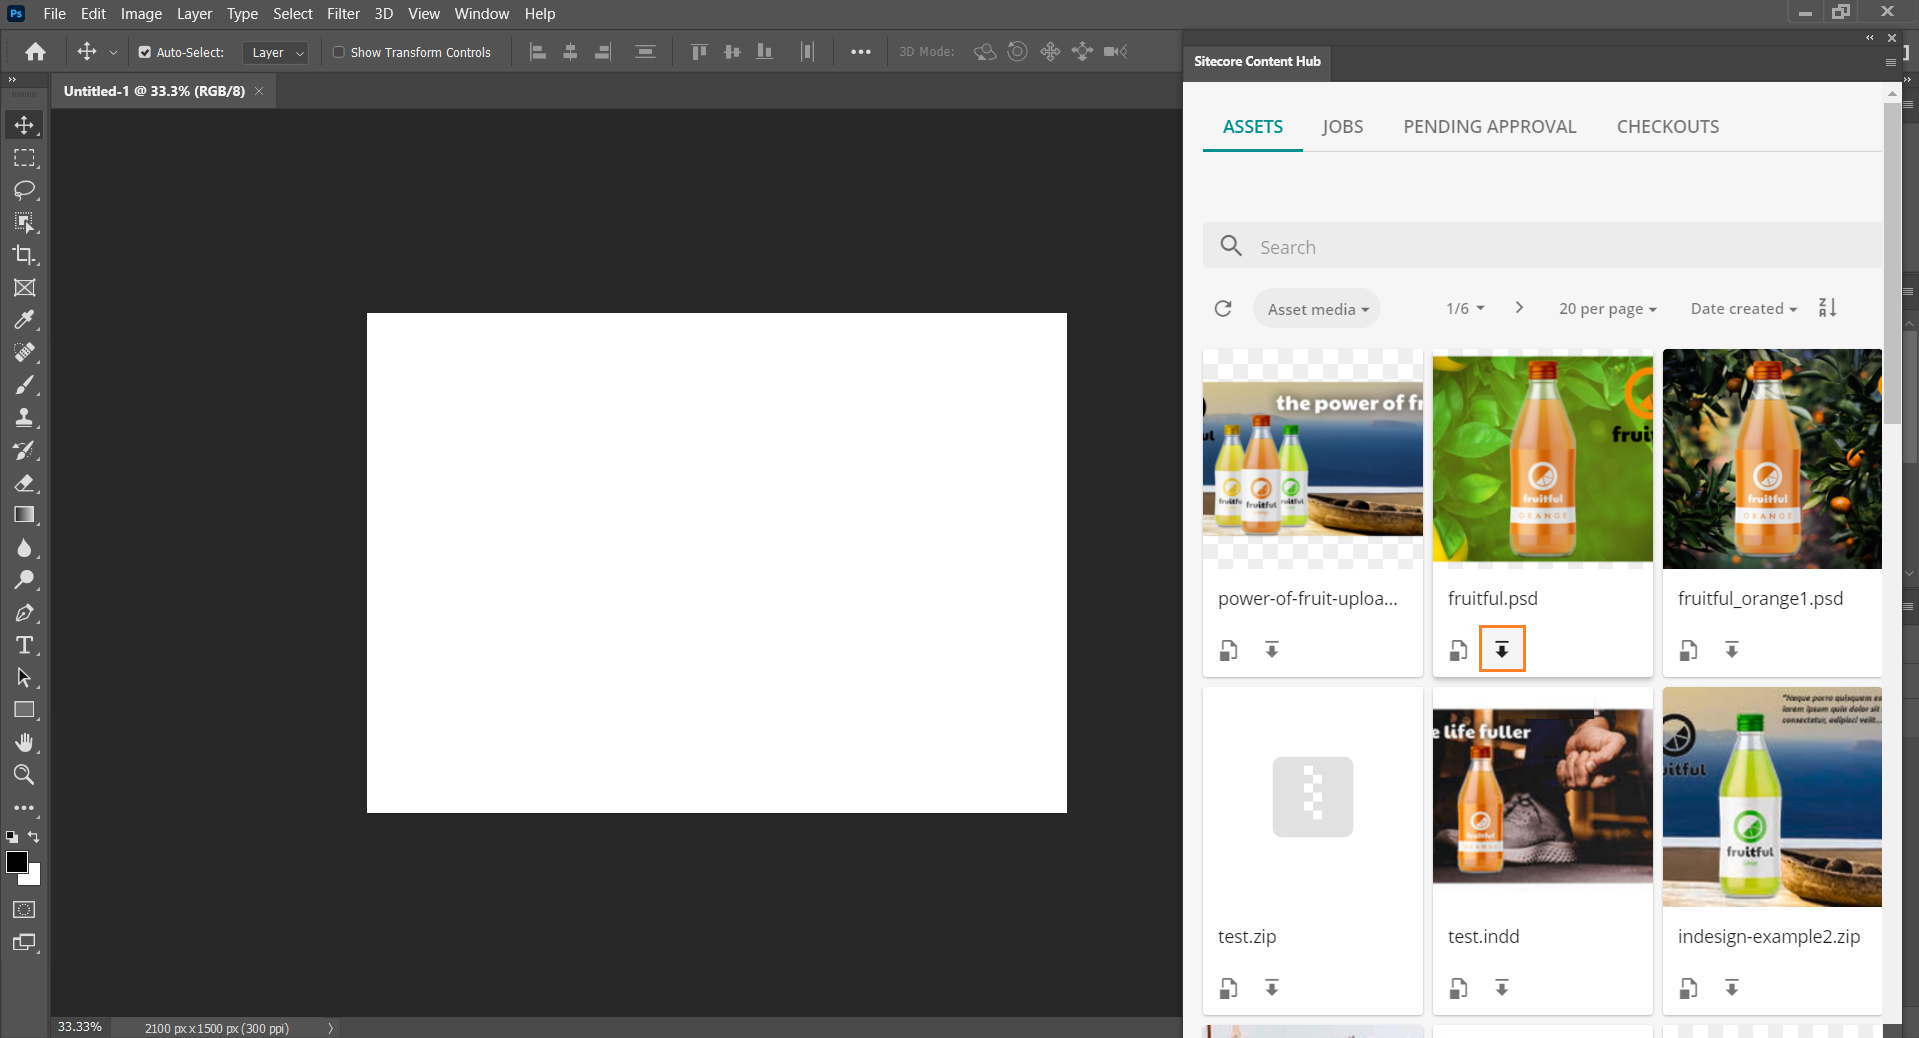 photoshop sitecore modal asset with check out highlighted: photoshop_sitecore_modal_asset_check_out.png